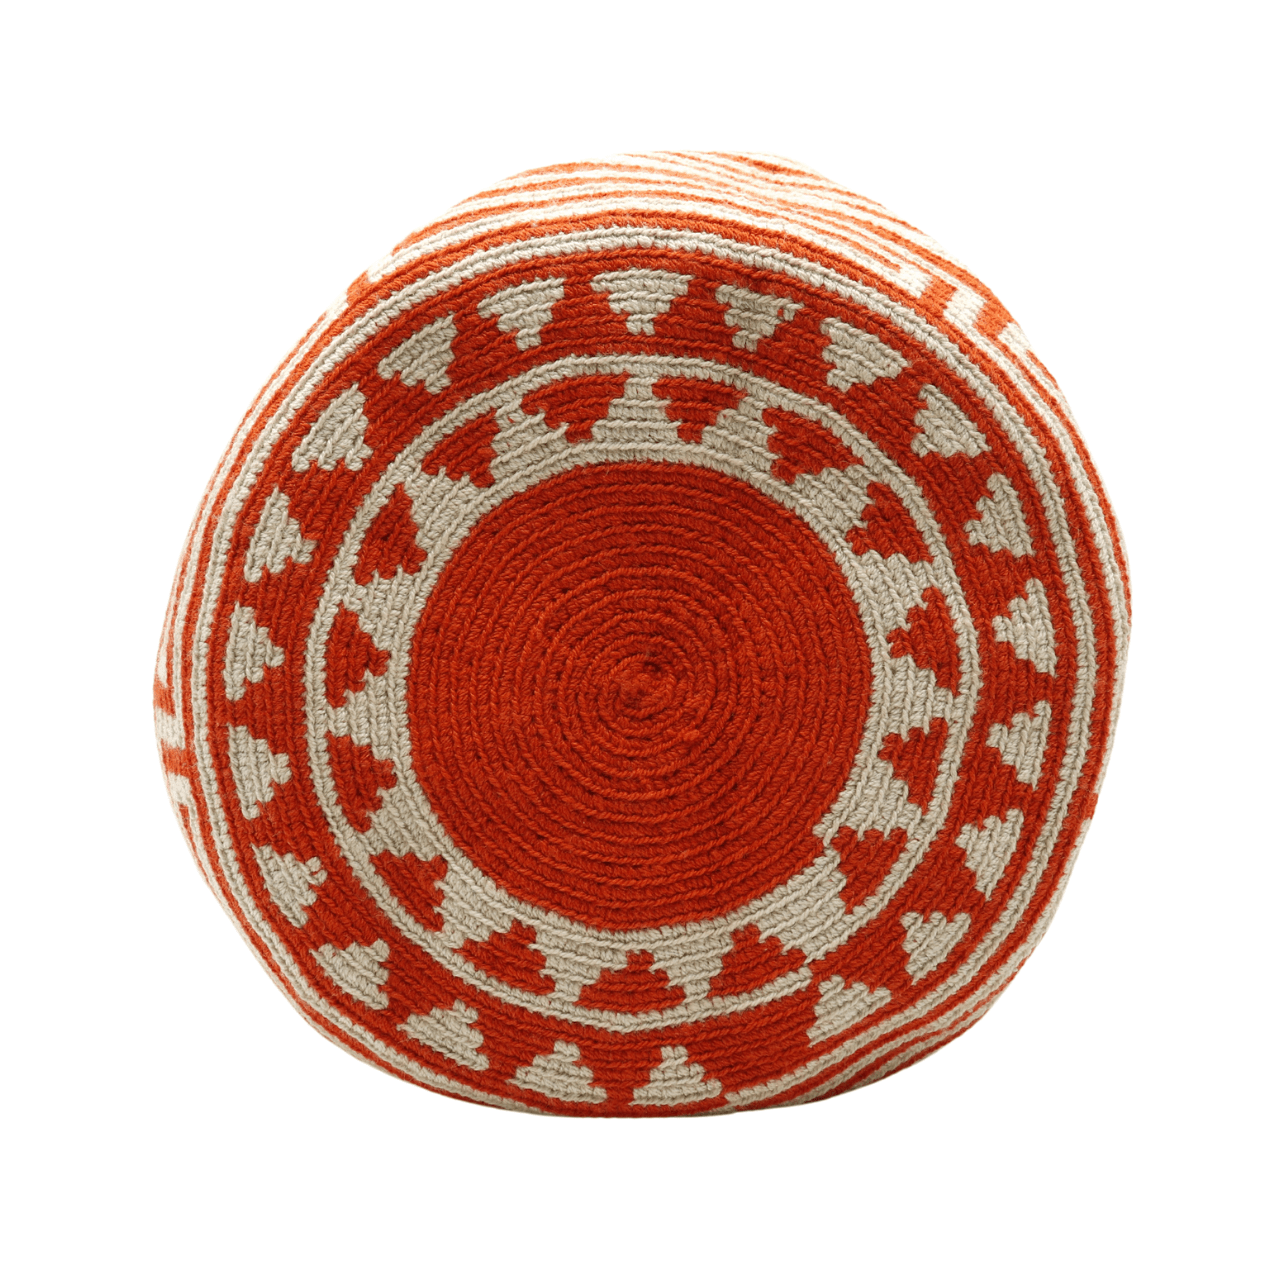 Salento Wayuu bag in vibrant tomato red and soothing beige, showcasing exquisite craftsmanship and vibrant colors